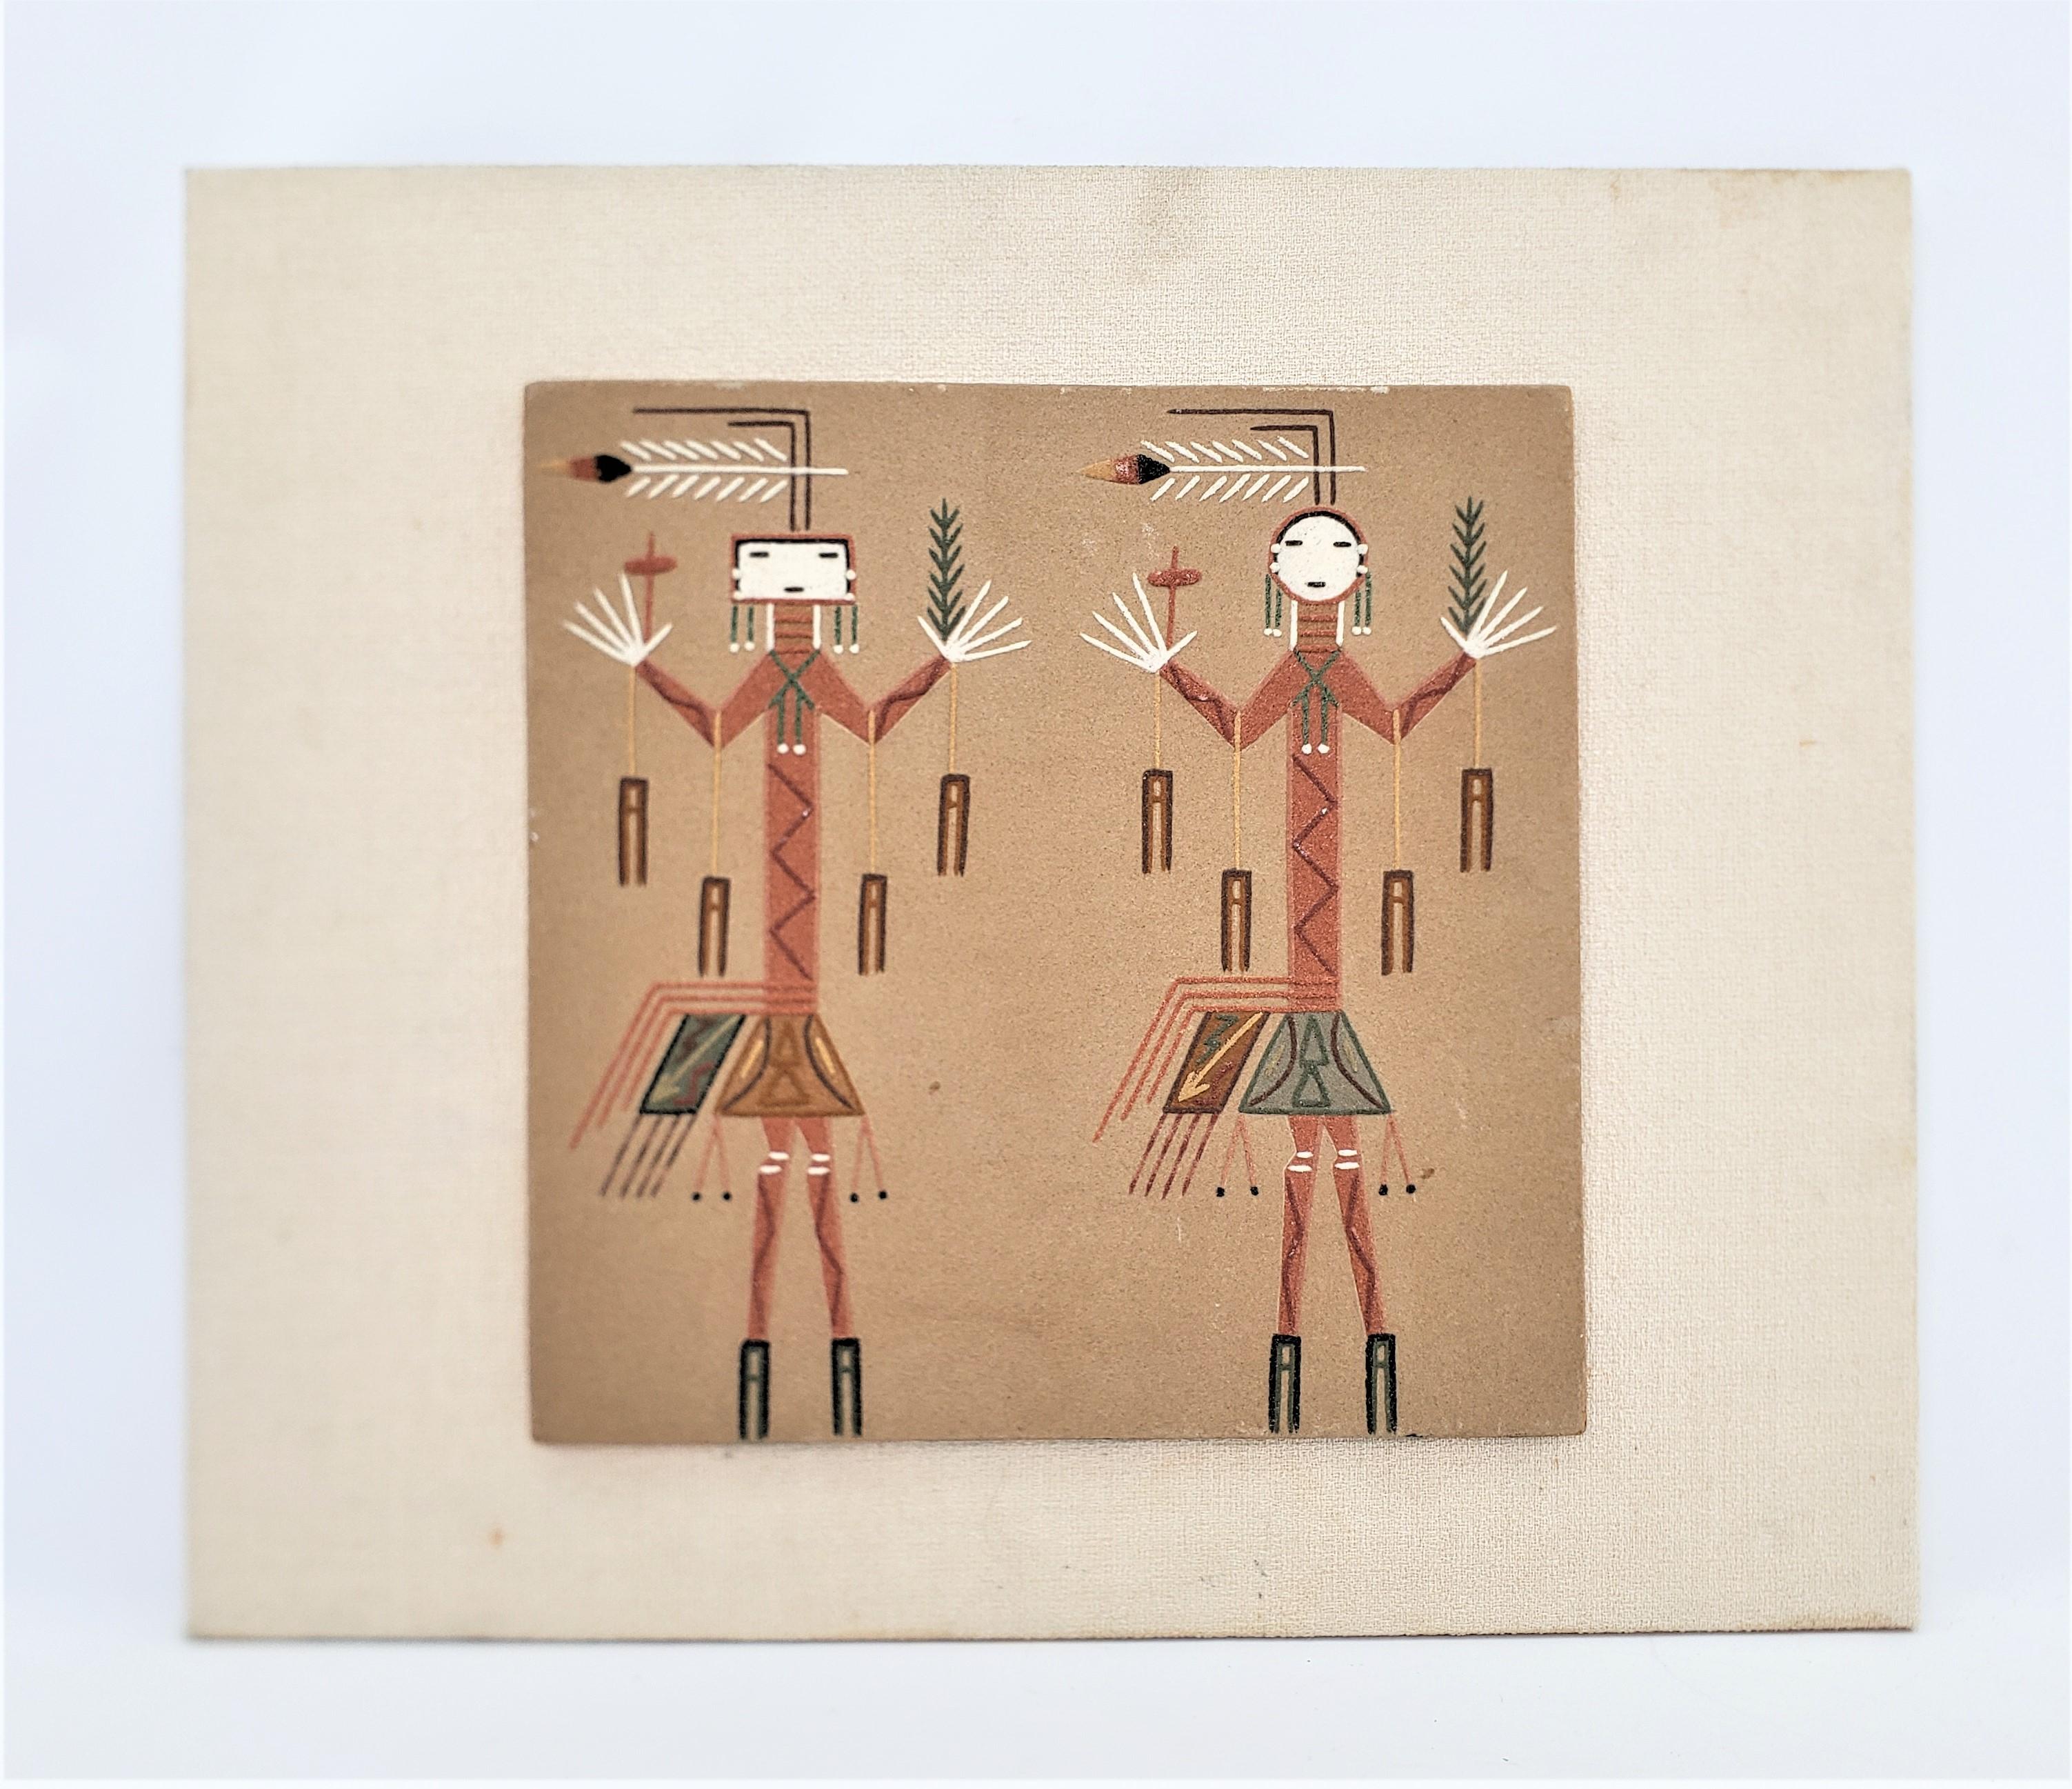 This vintage decorative mounted tile is unsigned, but presumed to have originated from the United States and date to approximately 1970 and done in a Navajo style. The tile is done in terracotta, which depicts two 